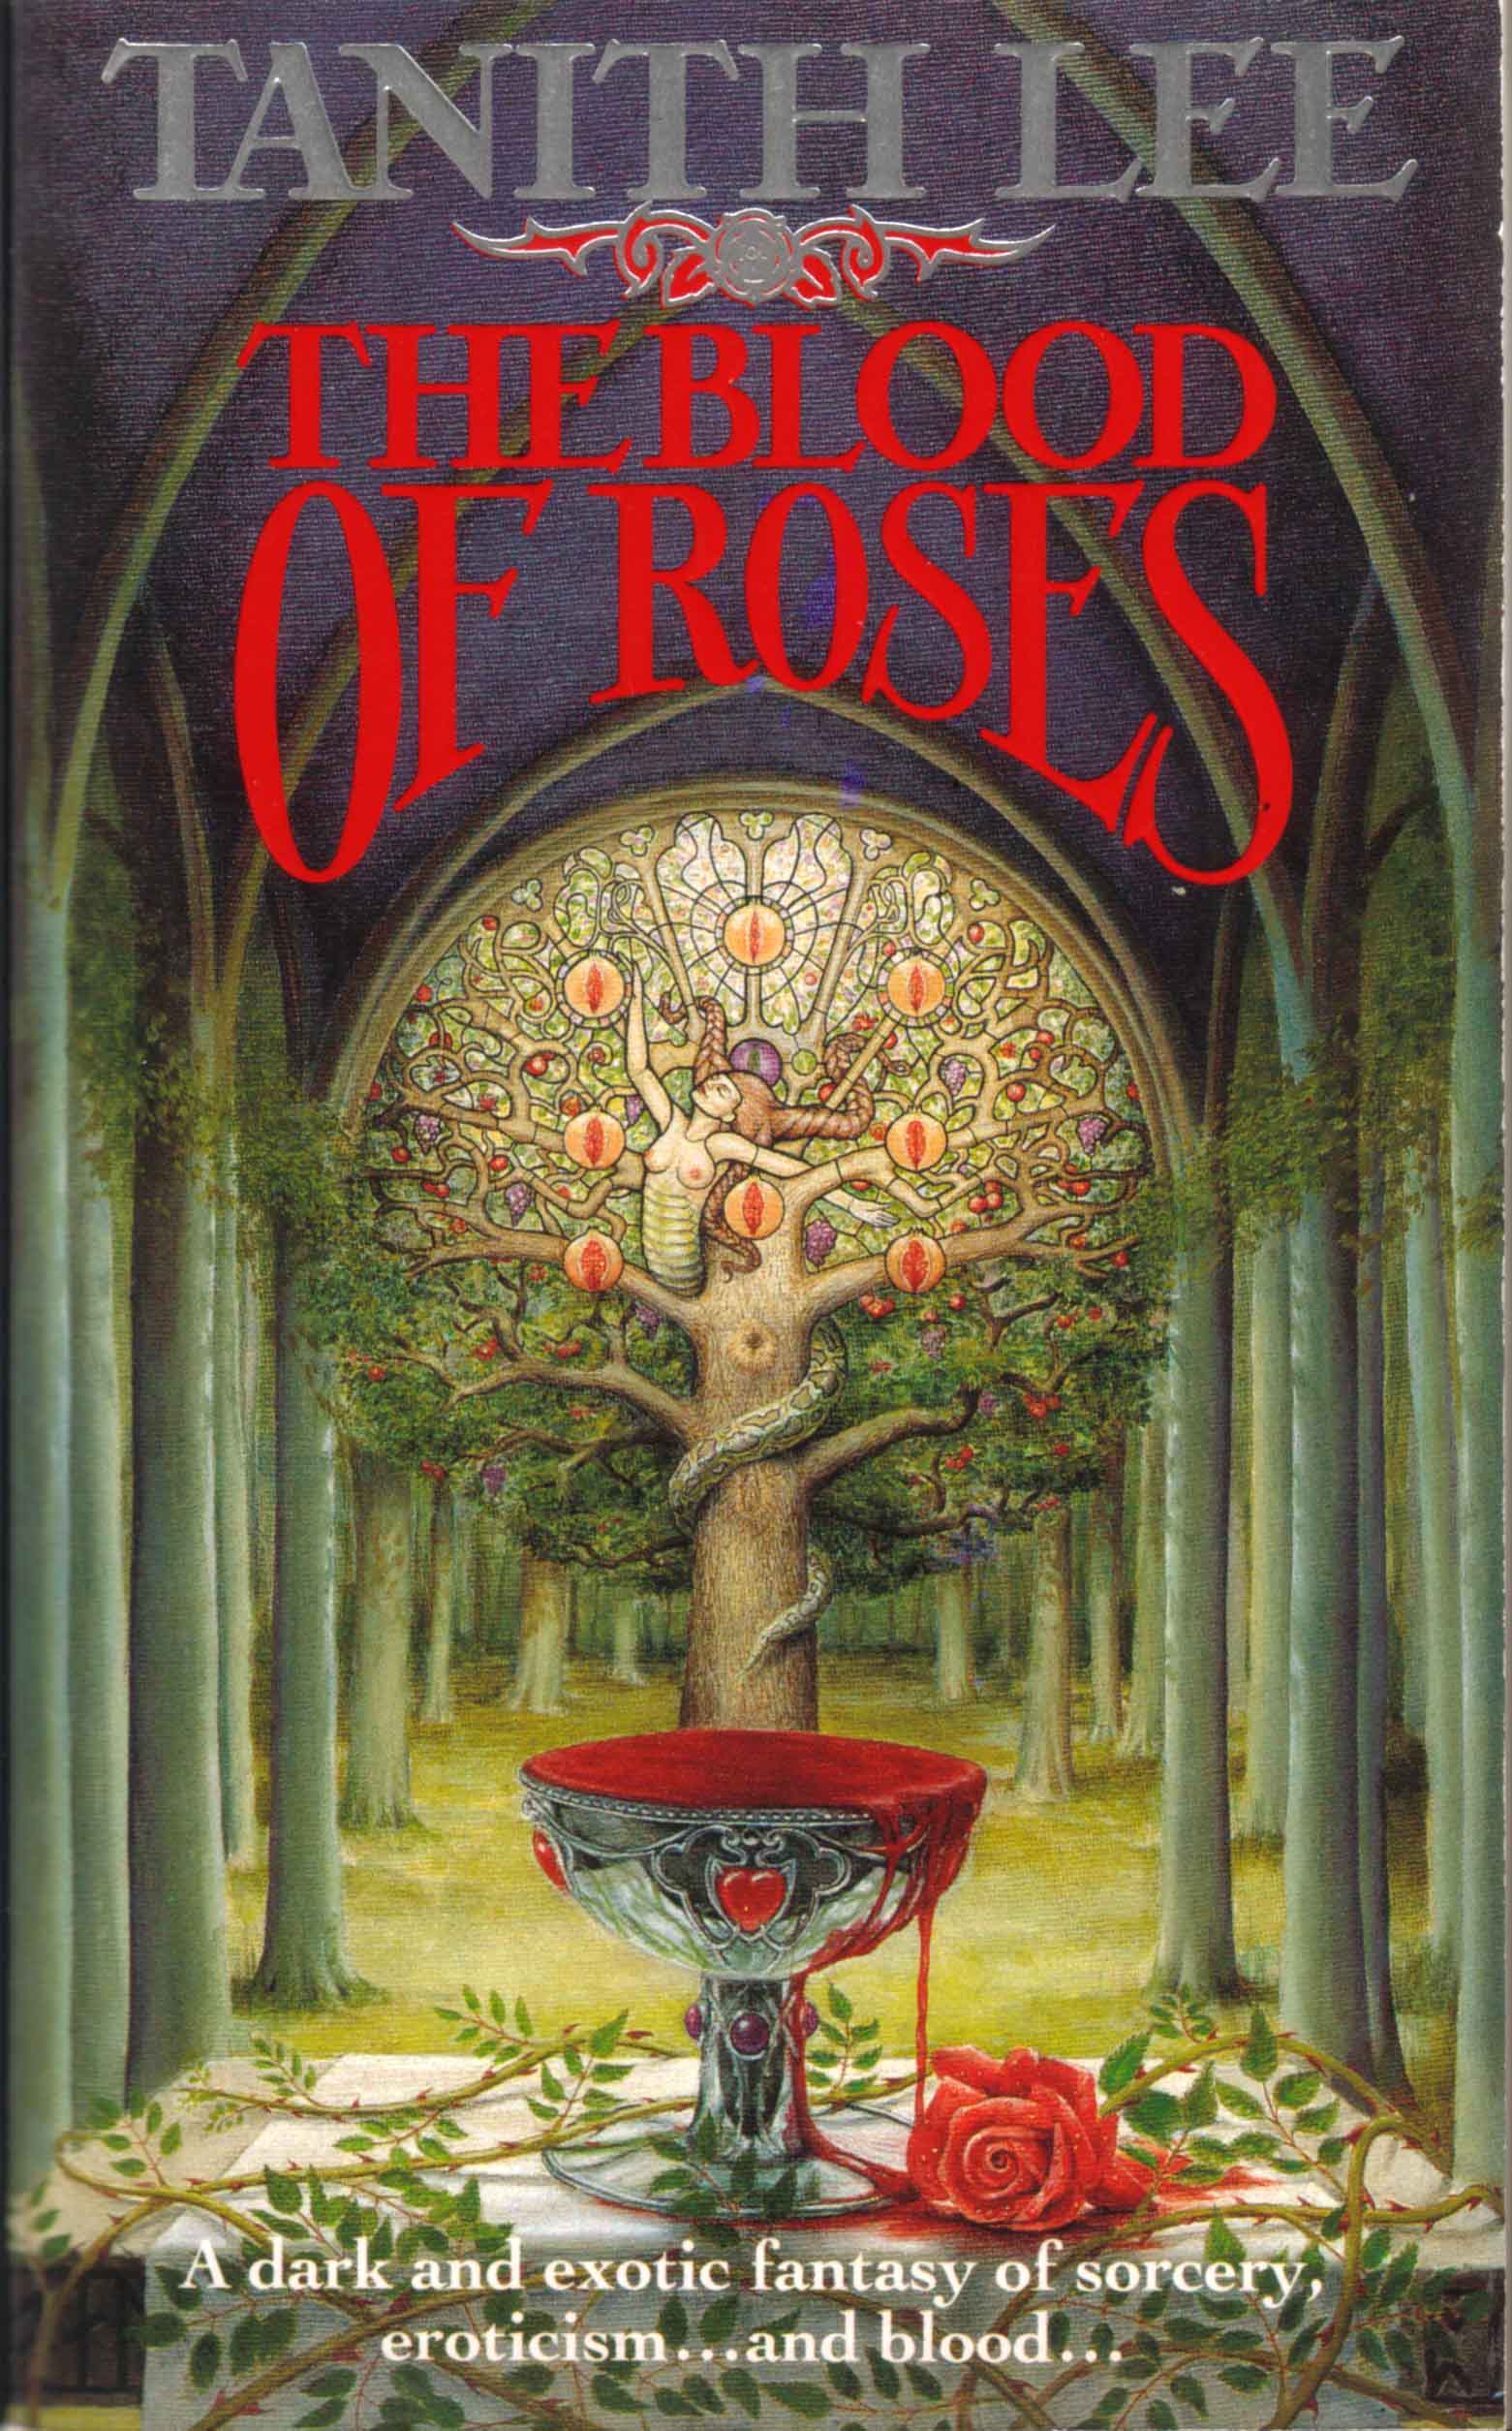 The Blood Of Roses